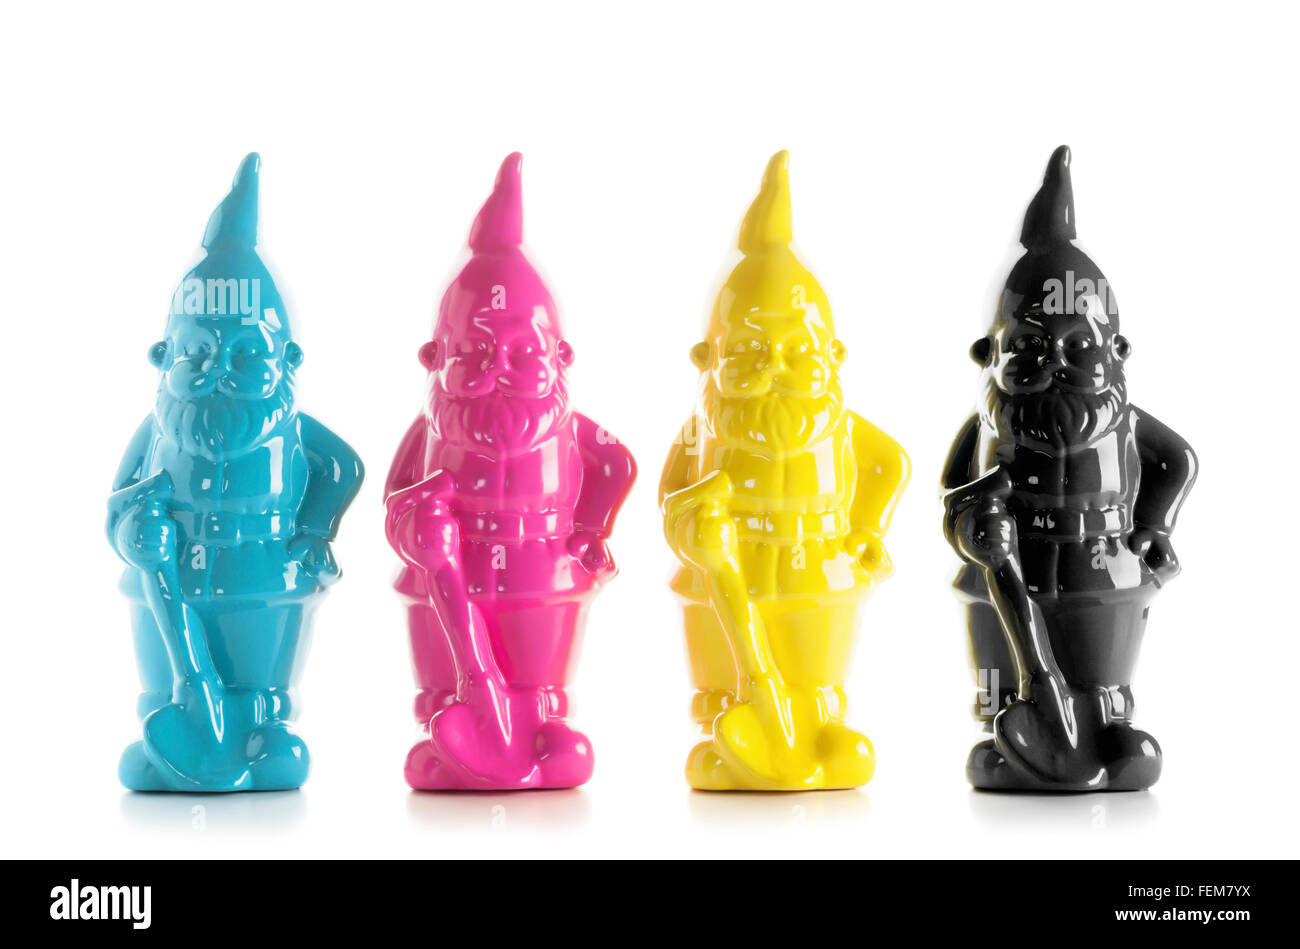 CMYK printing colors concept. Four garden gnomes in colors cyan, magenta, yellow and black isolated on white background Stock Photo